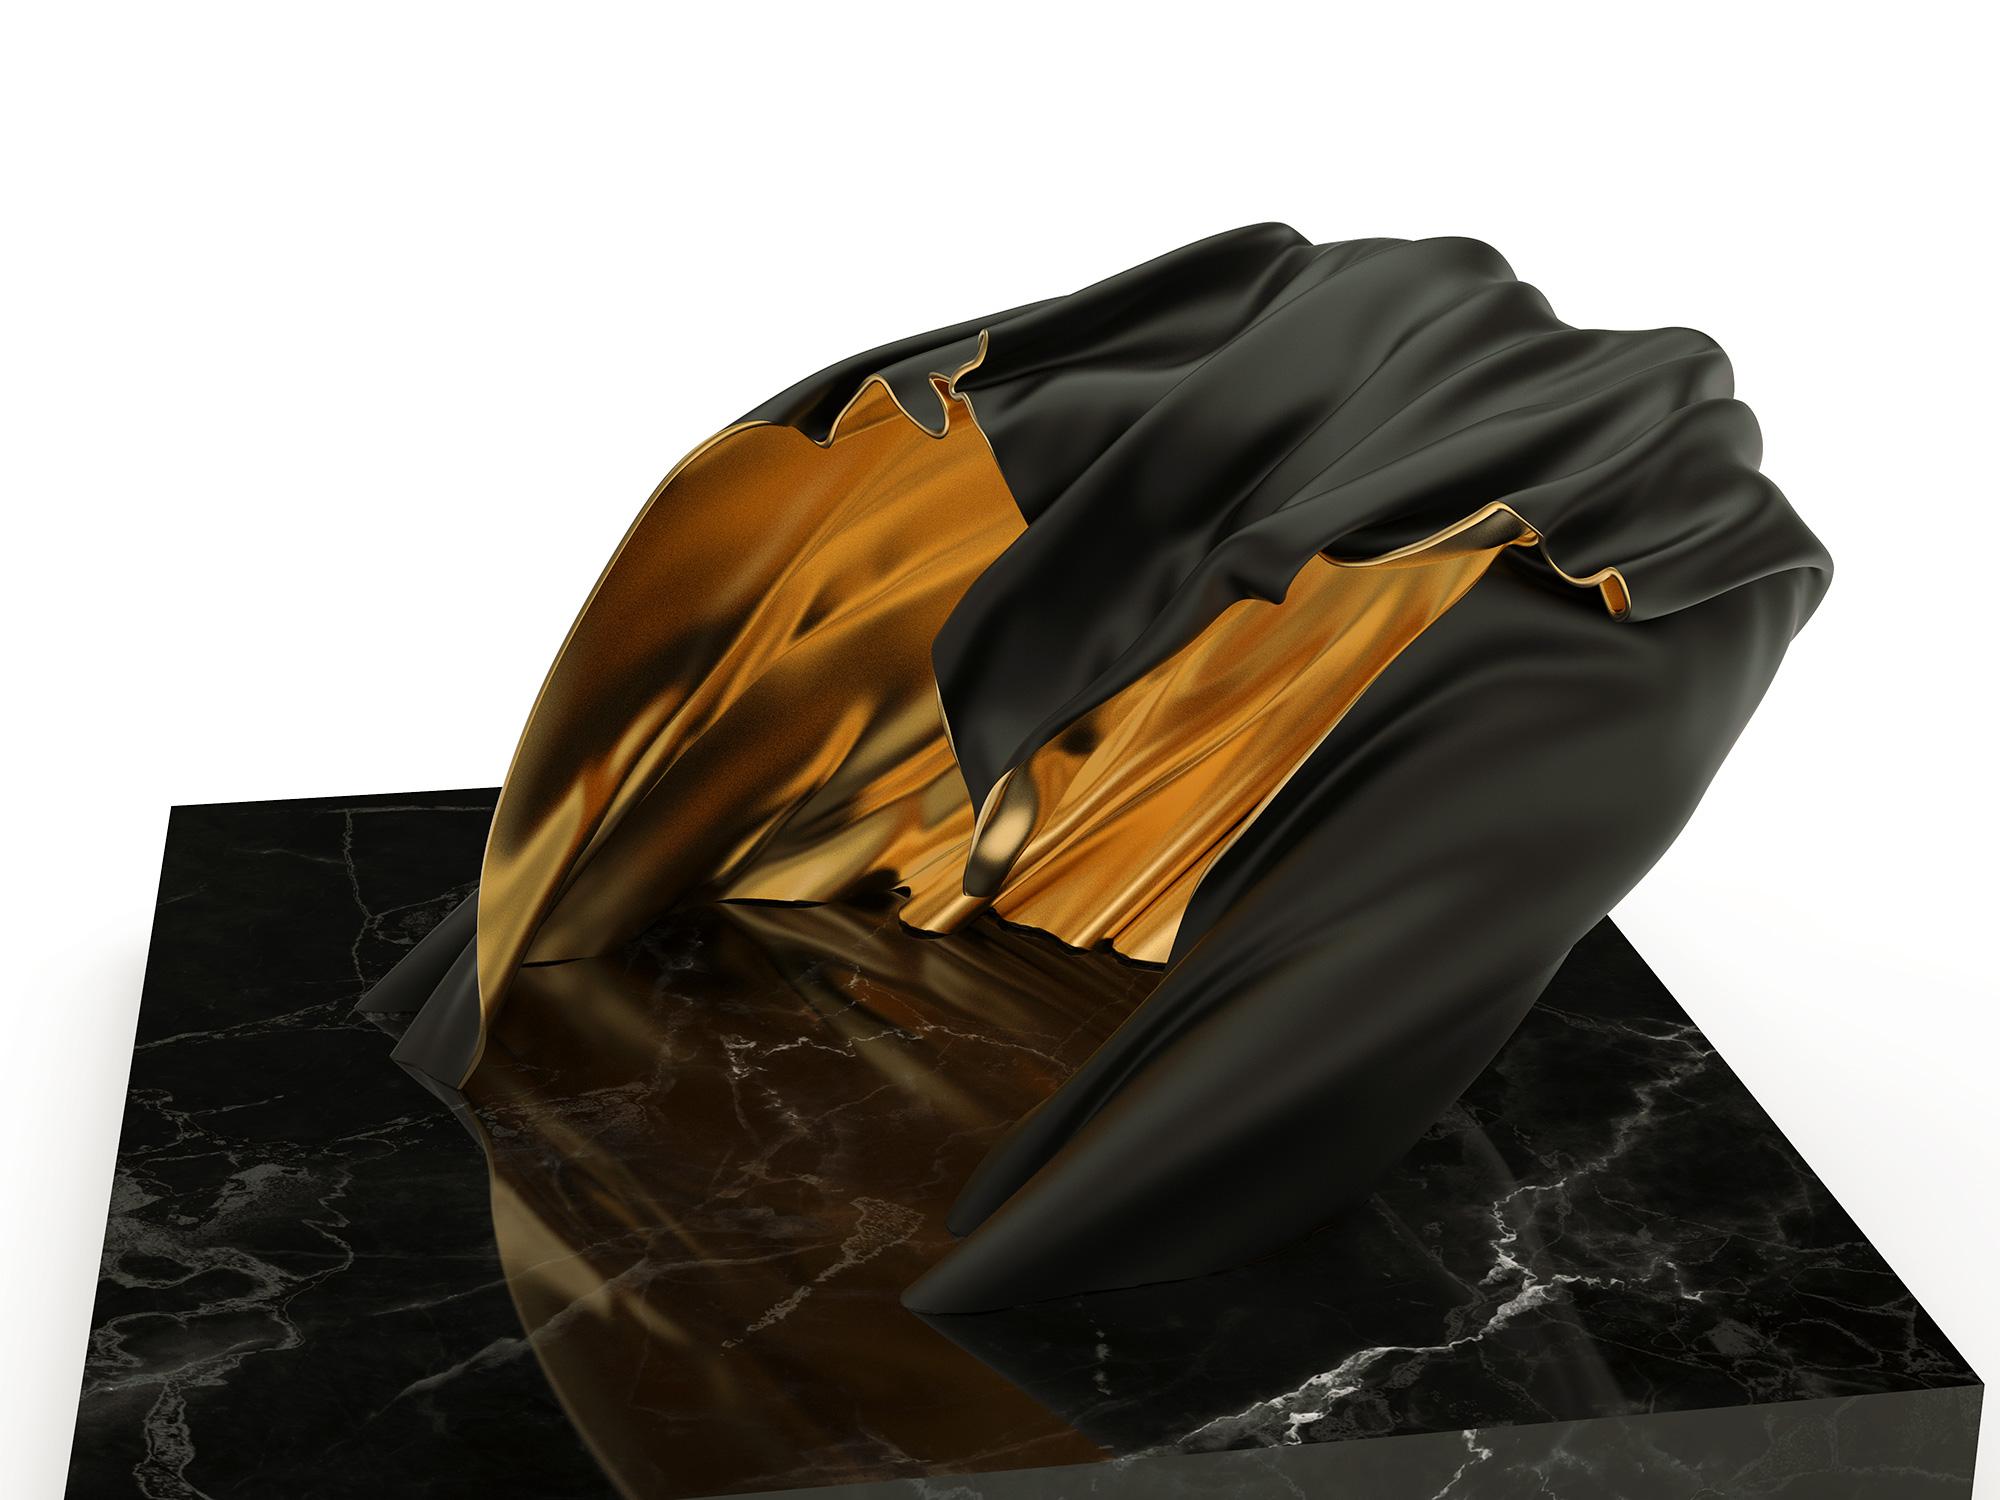 Visio Black and Golden Face Sculpture 1